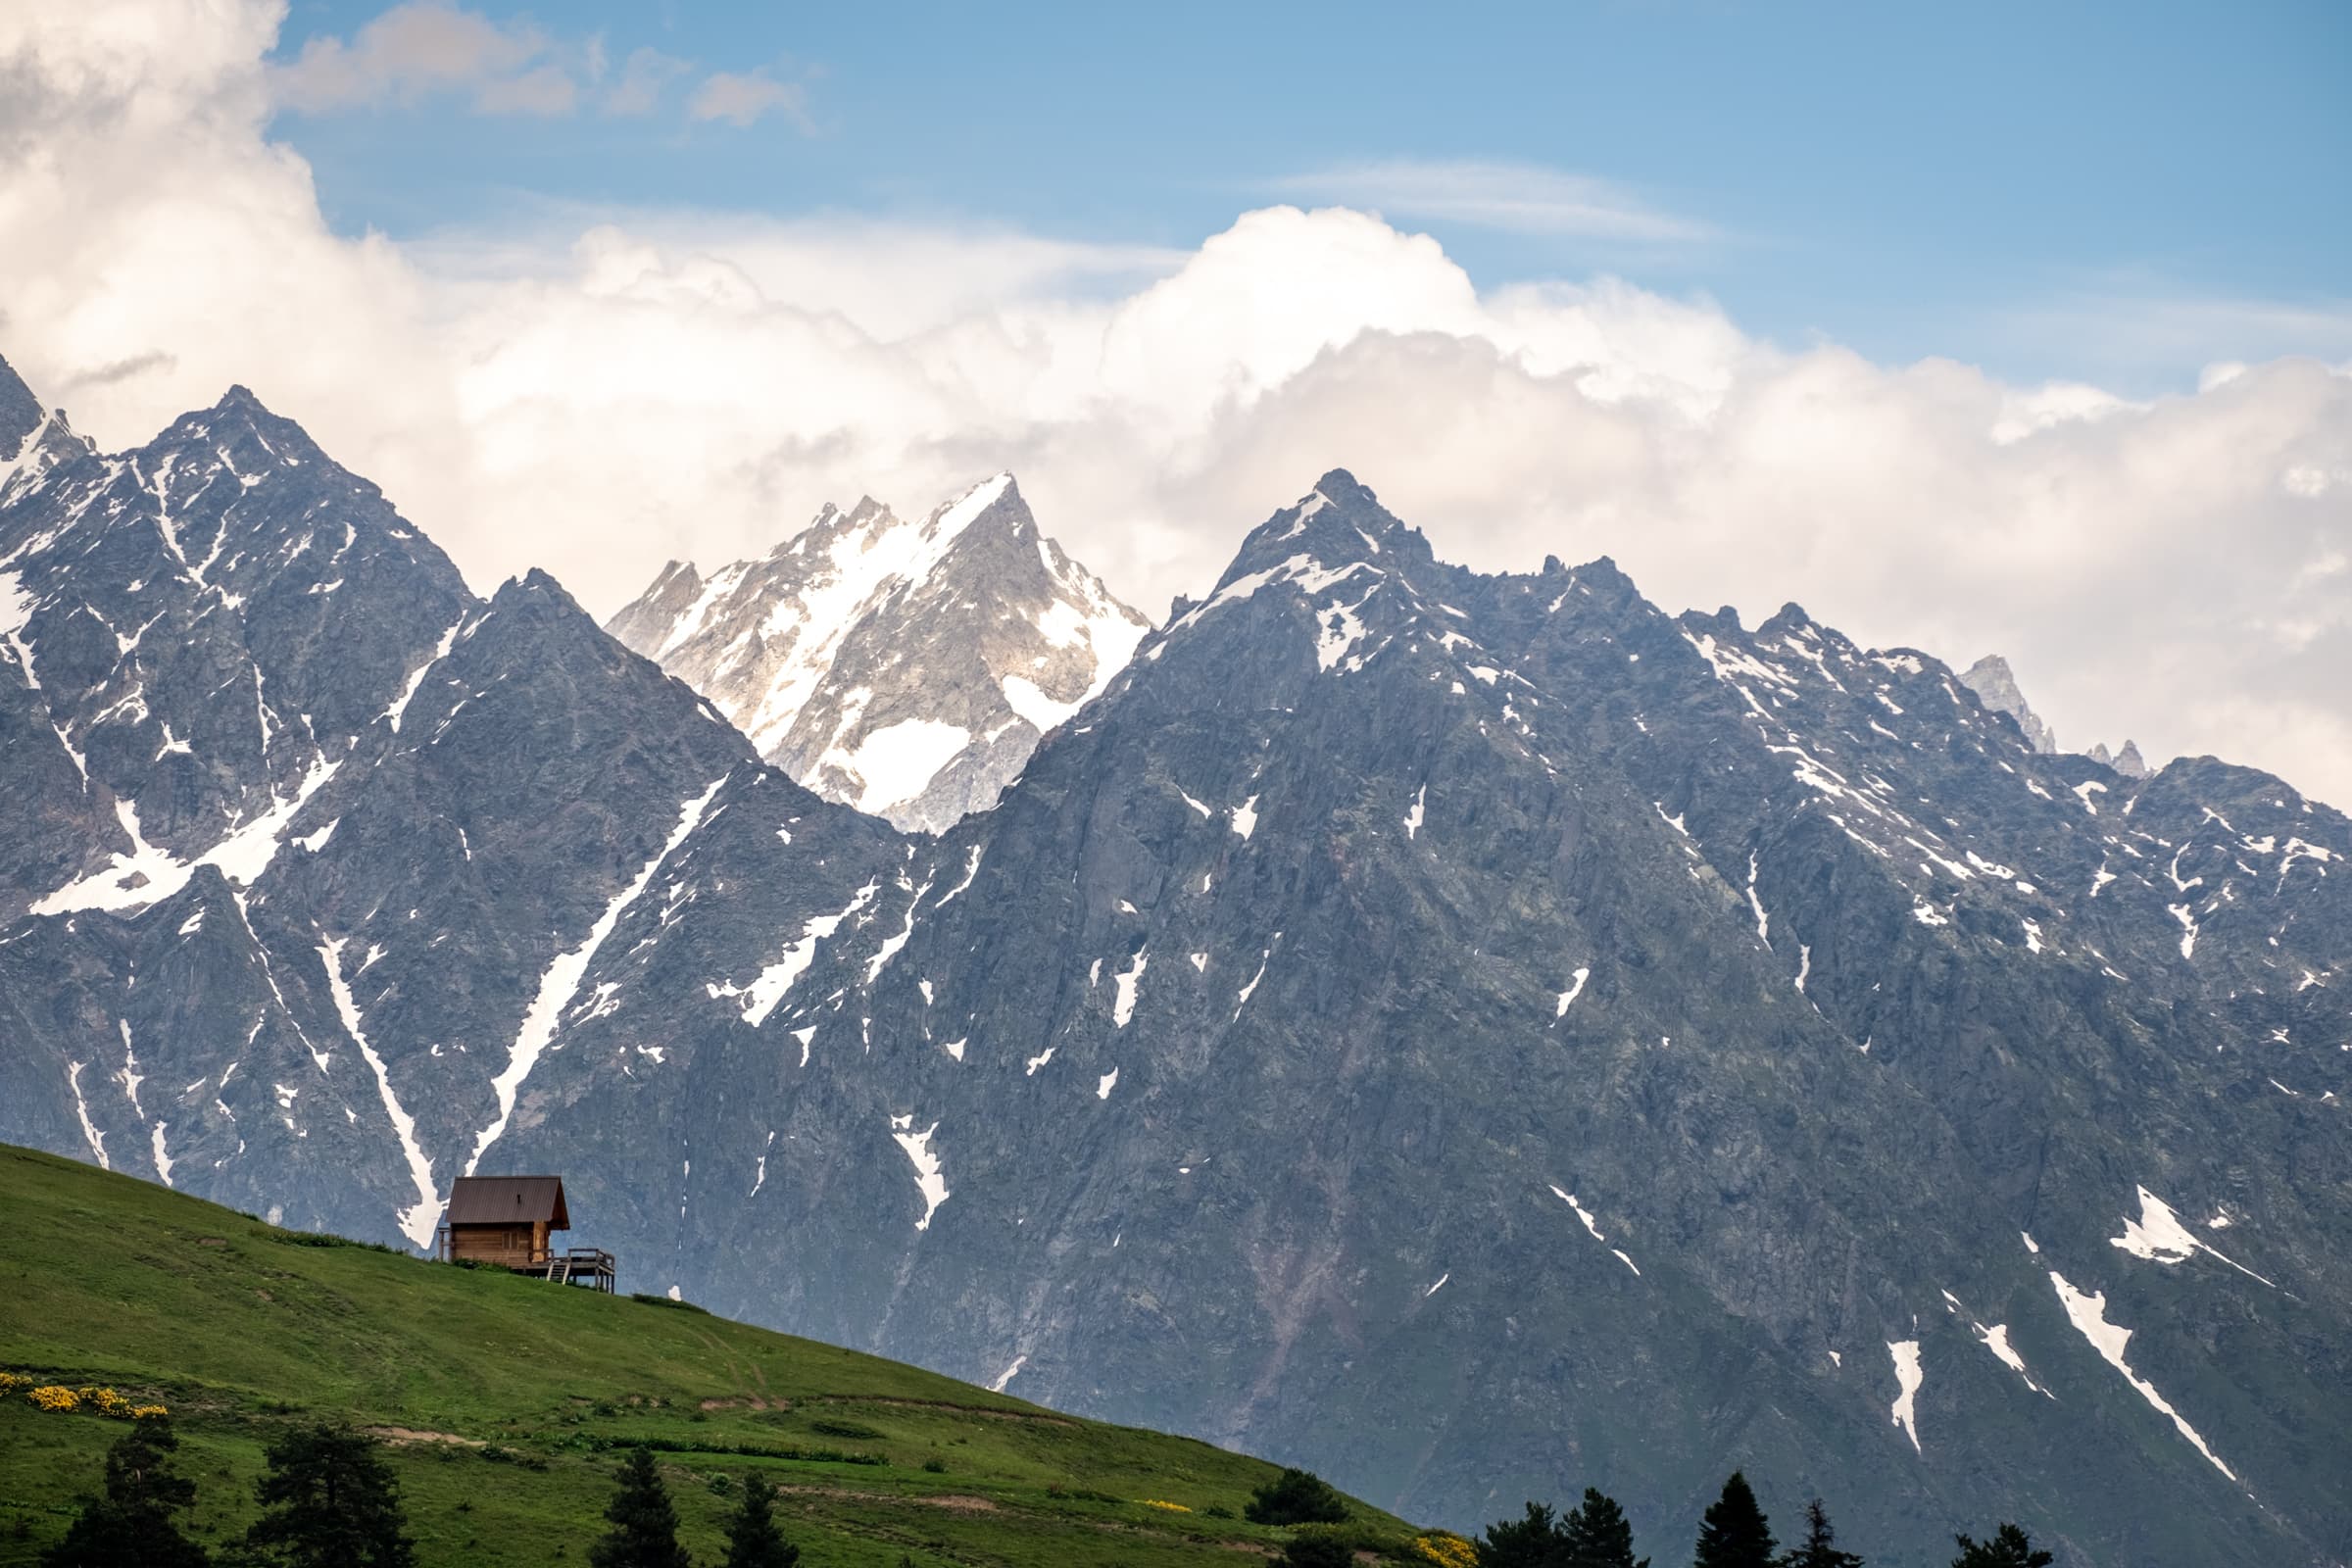 Wooden mountain hut on a green meadow with blue skies and imposing steep jagged mountains behind